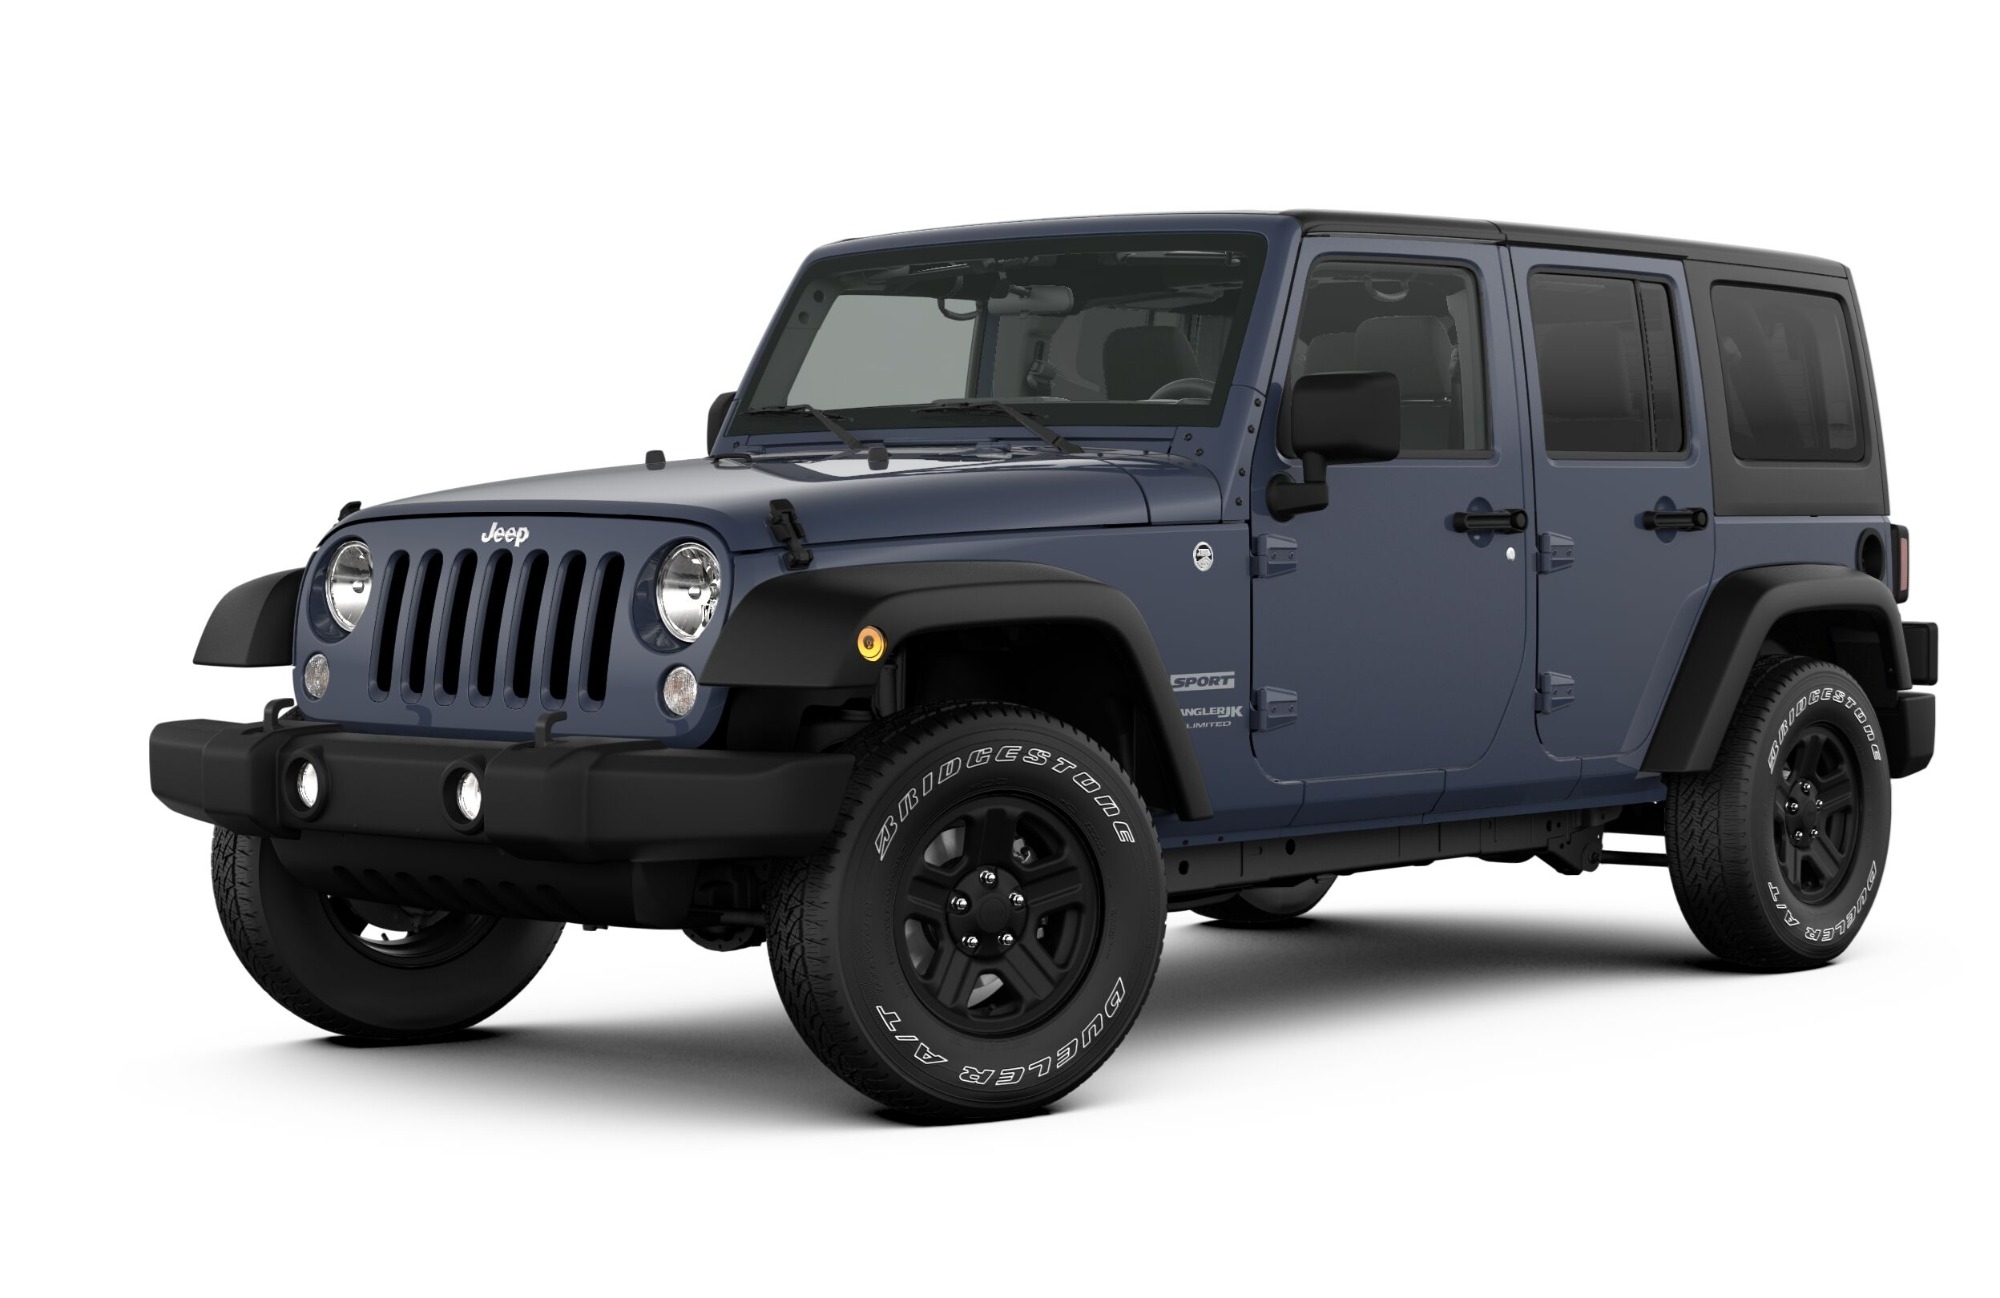 2018 Jeep Wrangler Unlimited Jk Sport Full Specs Features And Price